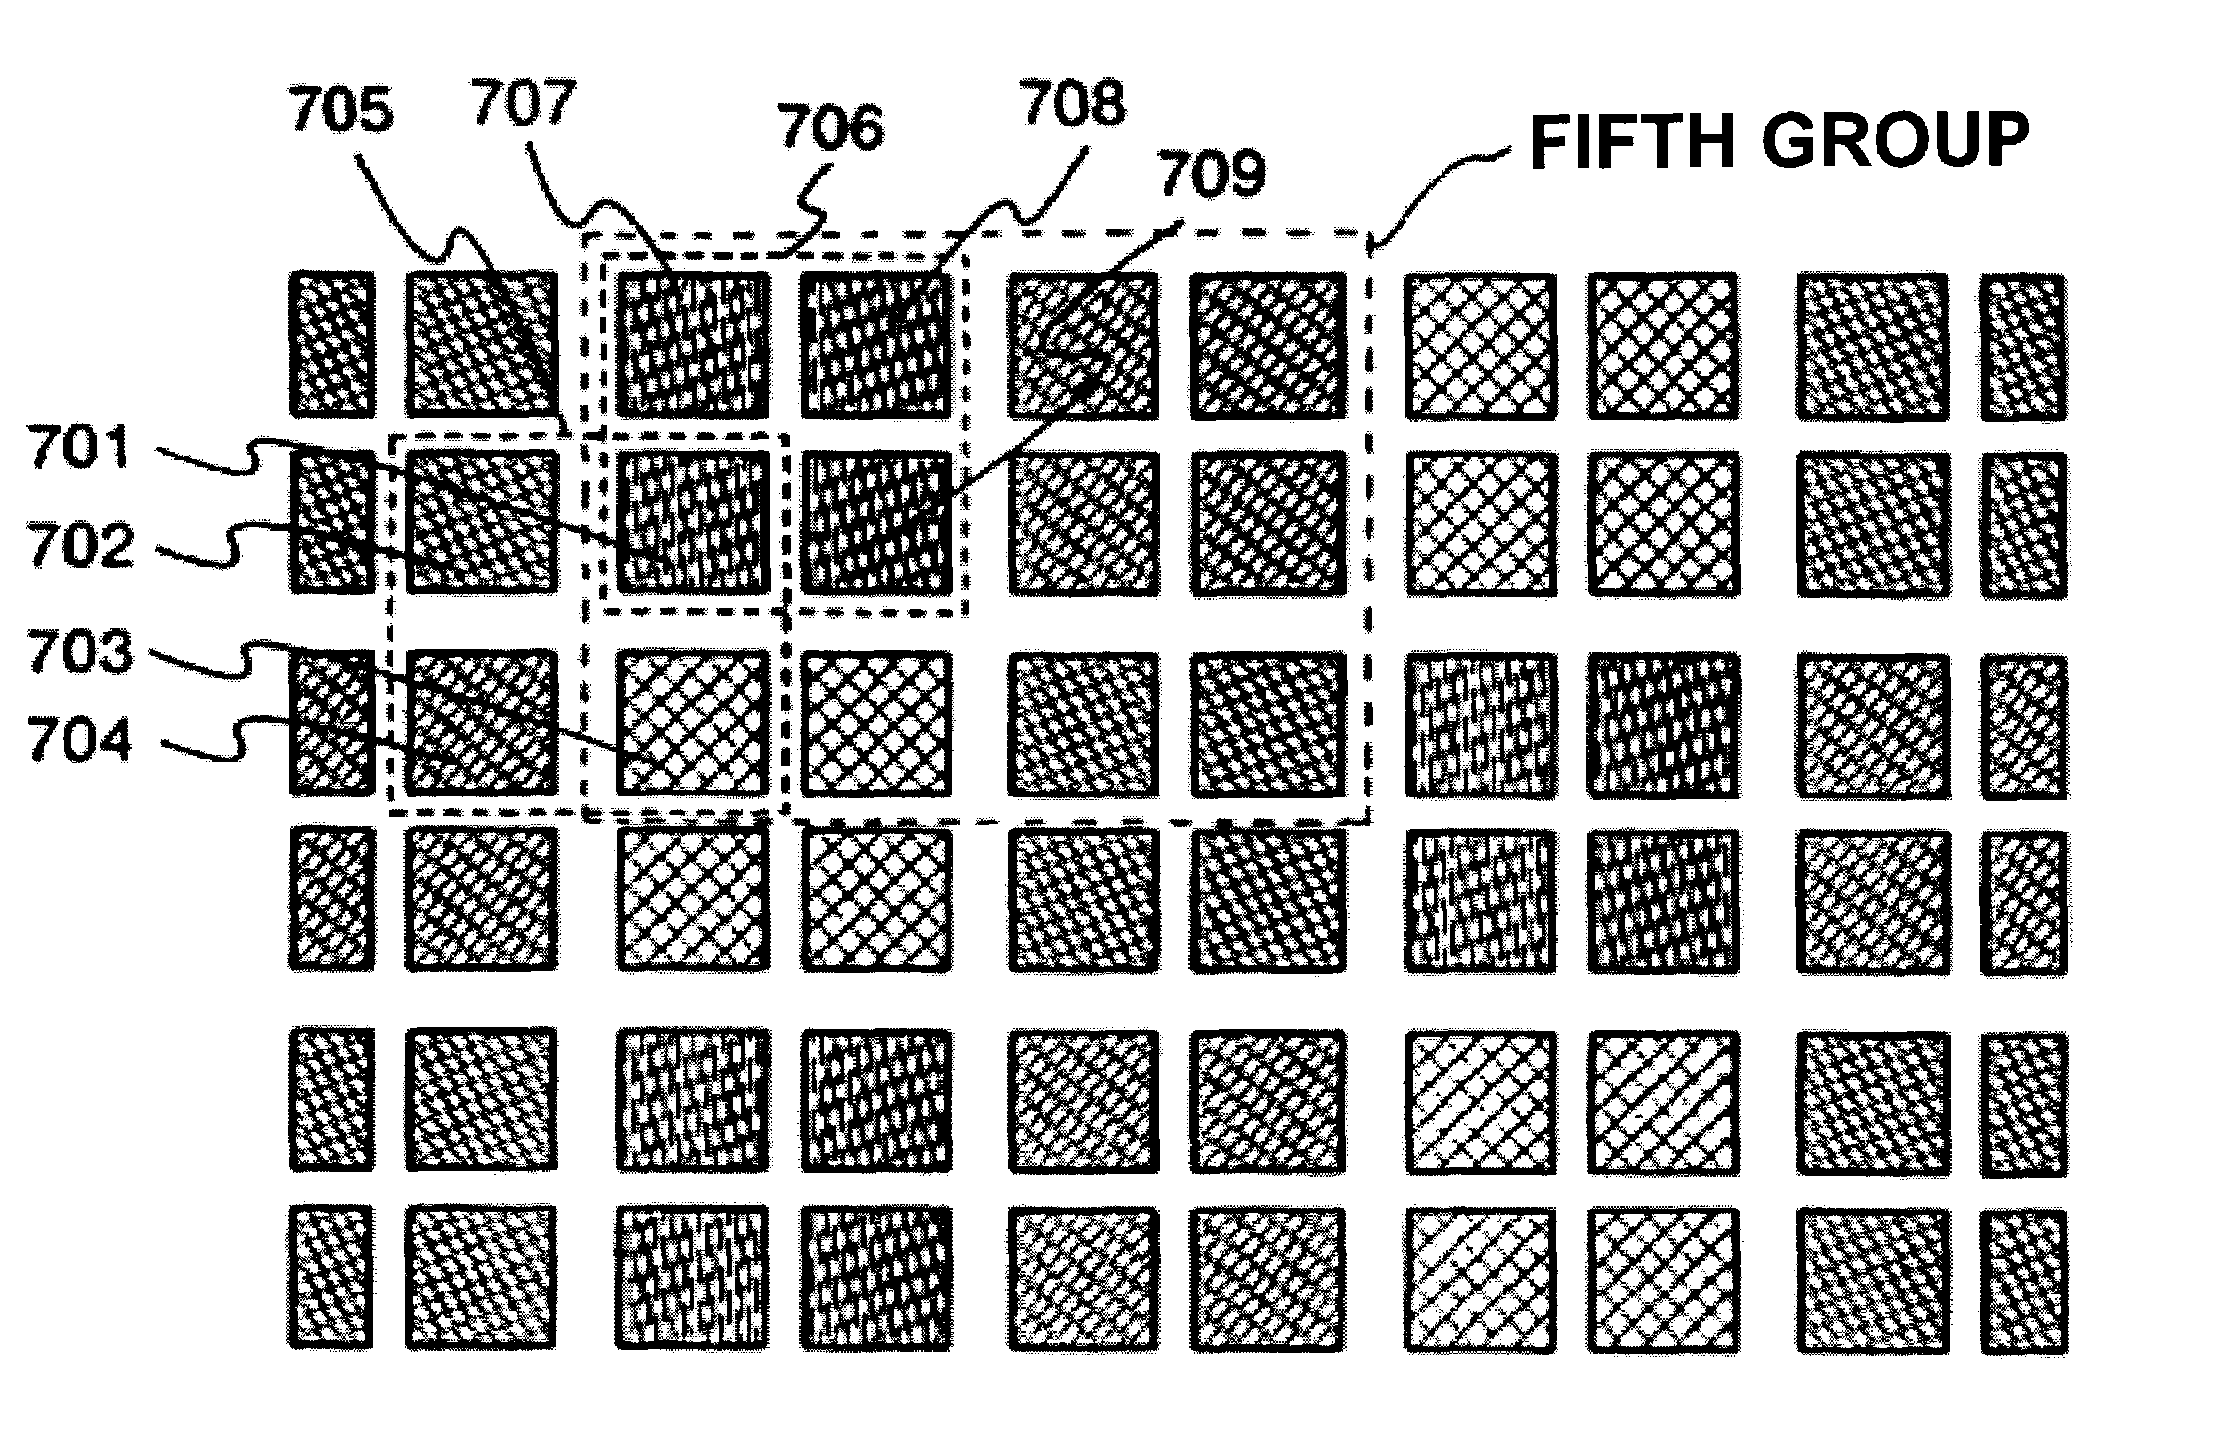 Light emitting device with specific four color arrangement